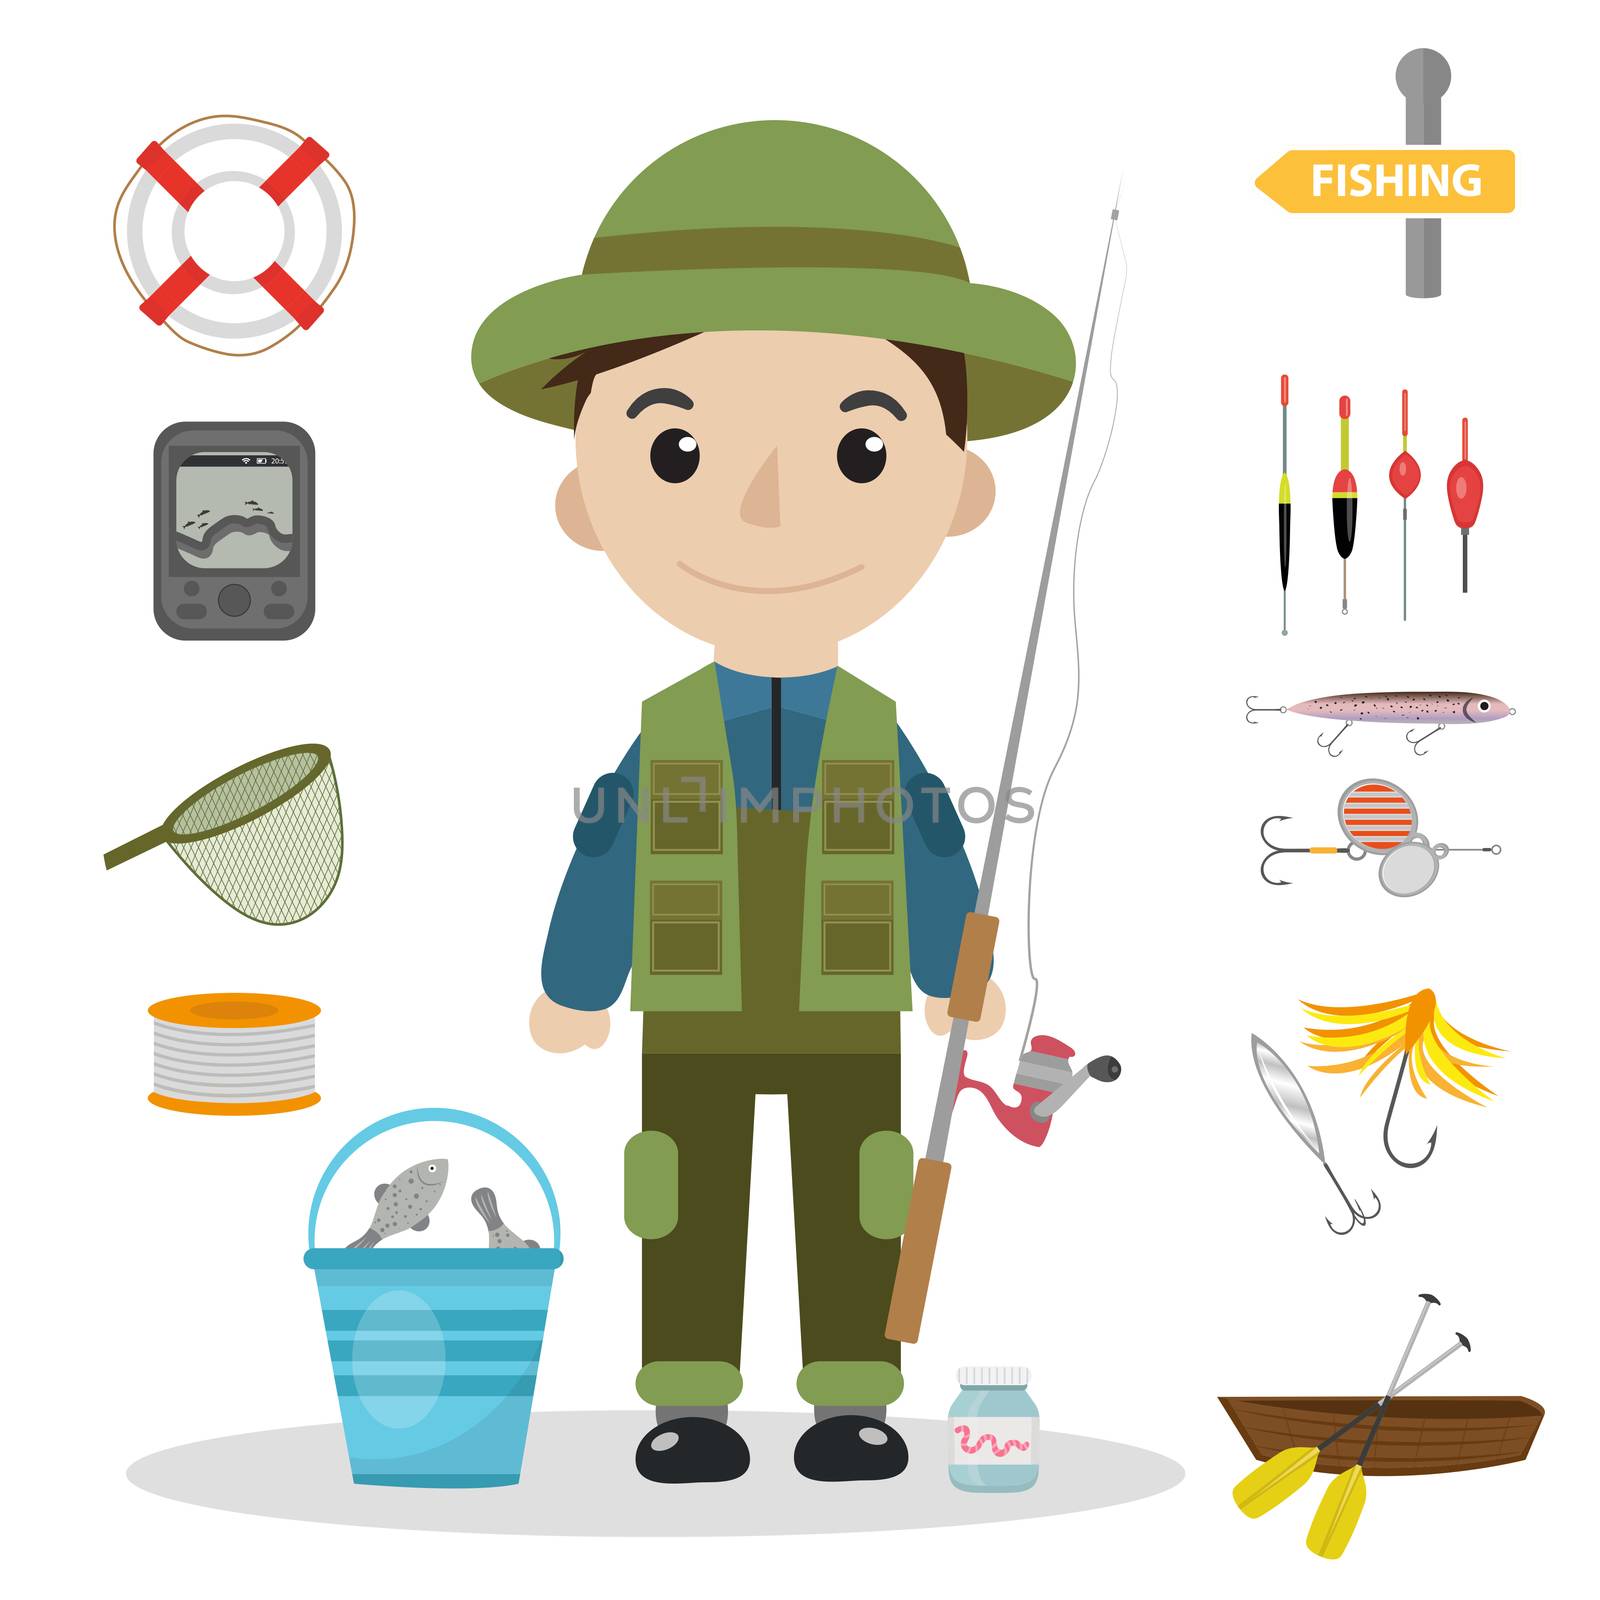 Fishing icon set, flat, cartoon style. Fishery collection objects, design elements, isolated on white background. Fisherman s tools with a fishing rod, tackle, bait, boat. ilustration, clip-art